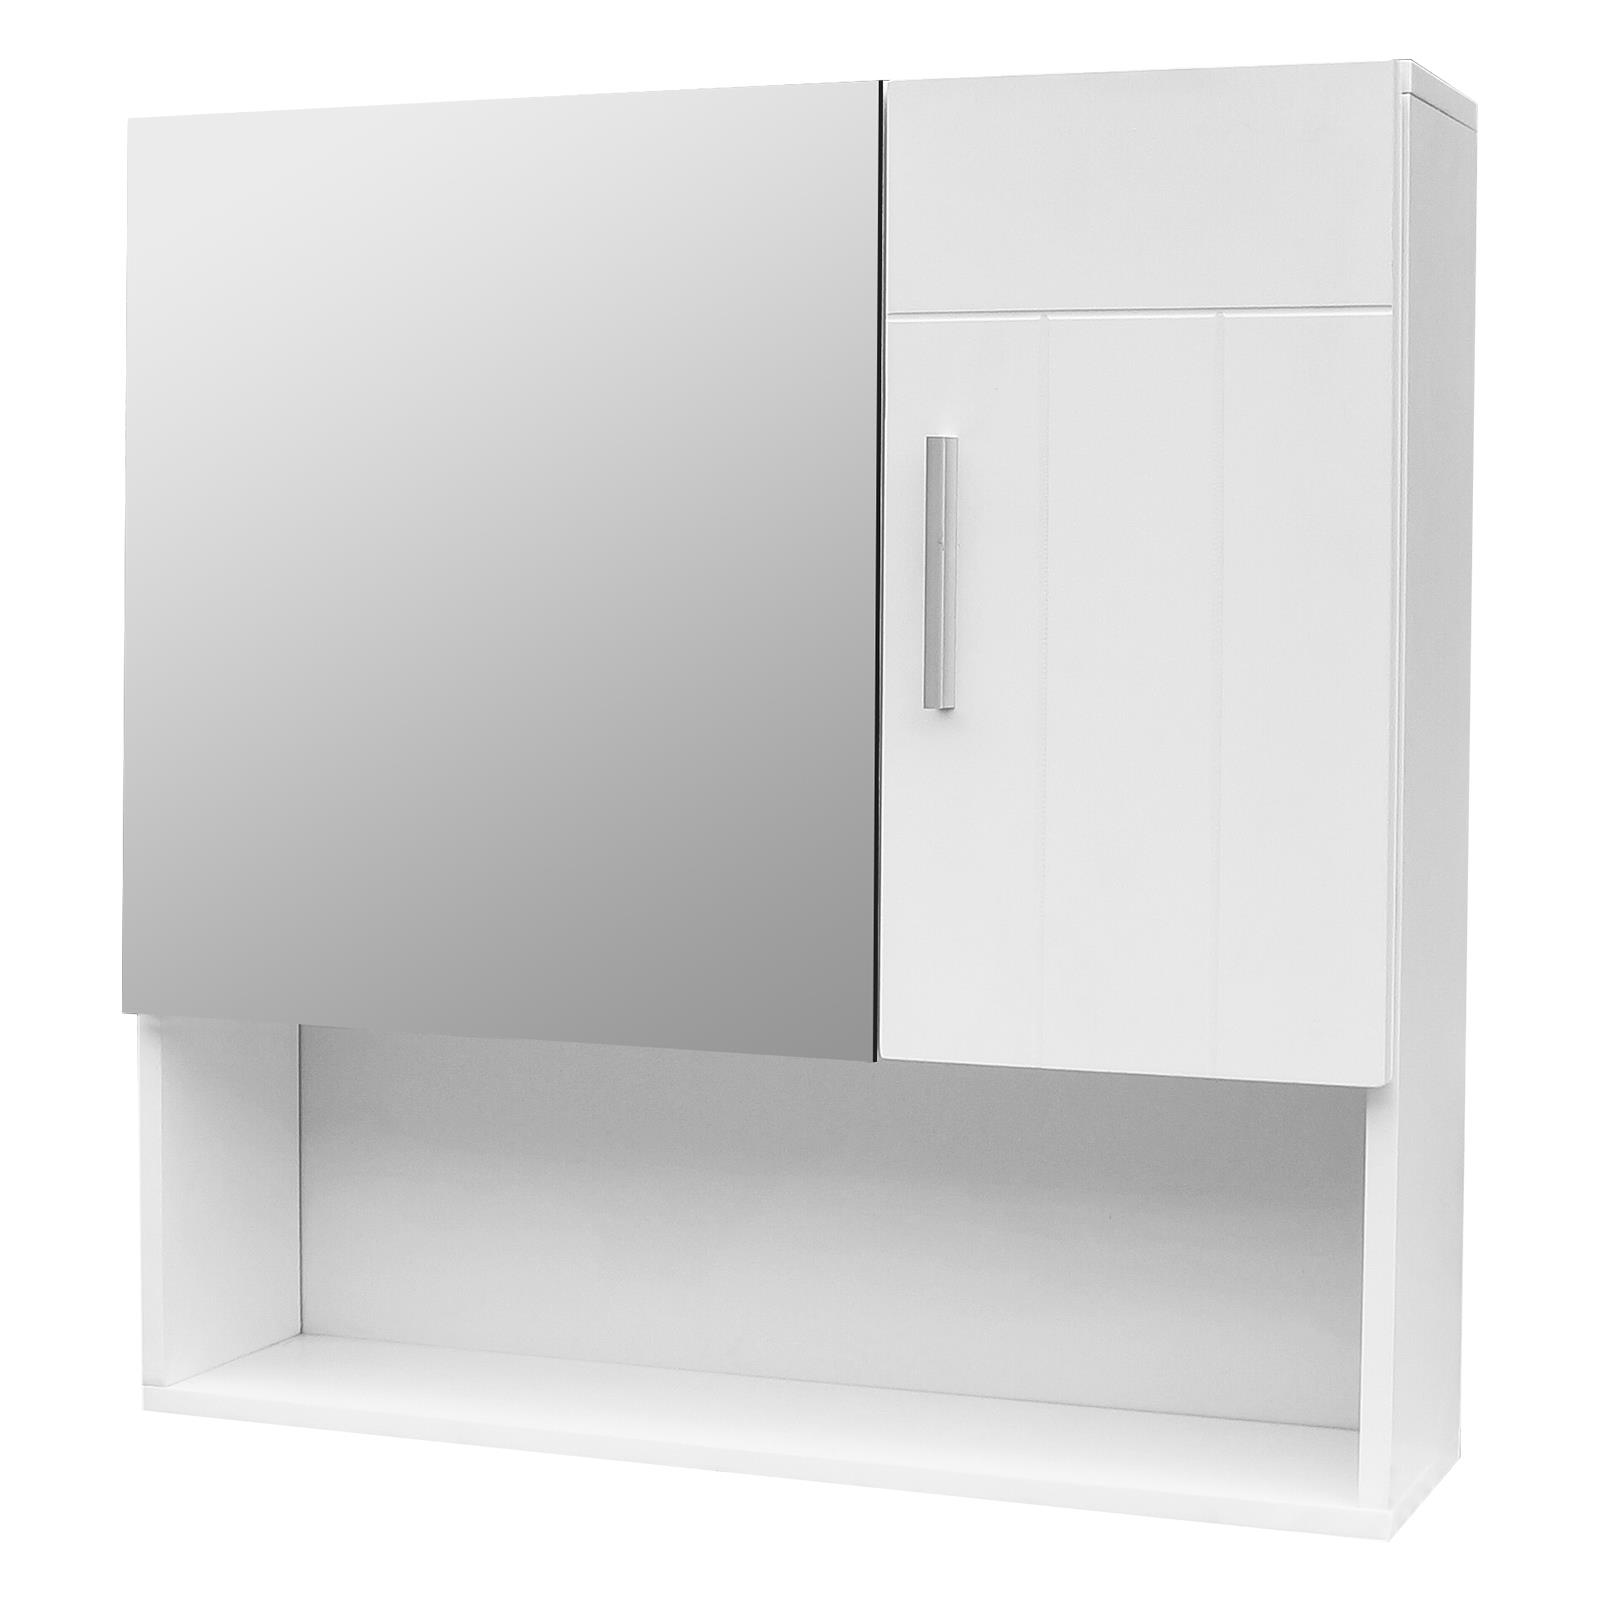 GoDecor Wall Storage Cabinet with mirror Doors and Shelf, Mirrored Wall Mounted Medicine Cabinet for Bathroom, White - image 1 of 5